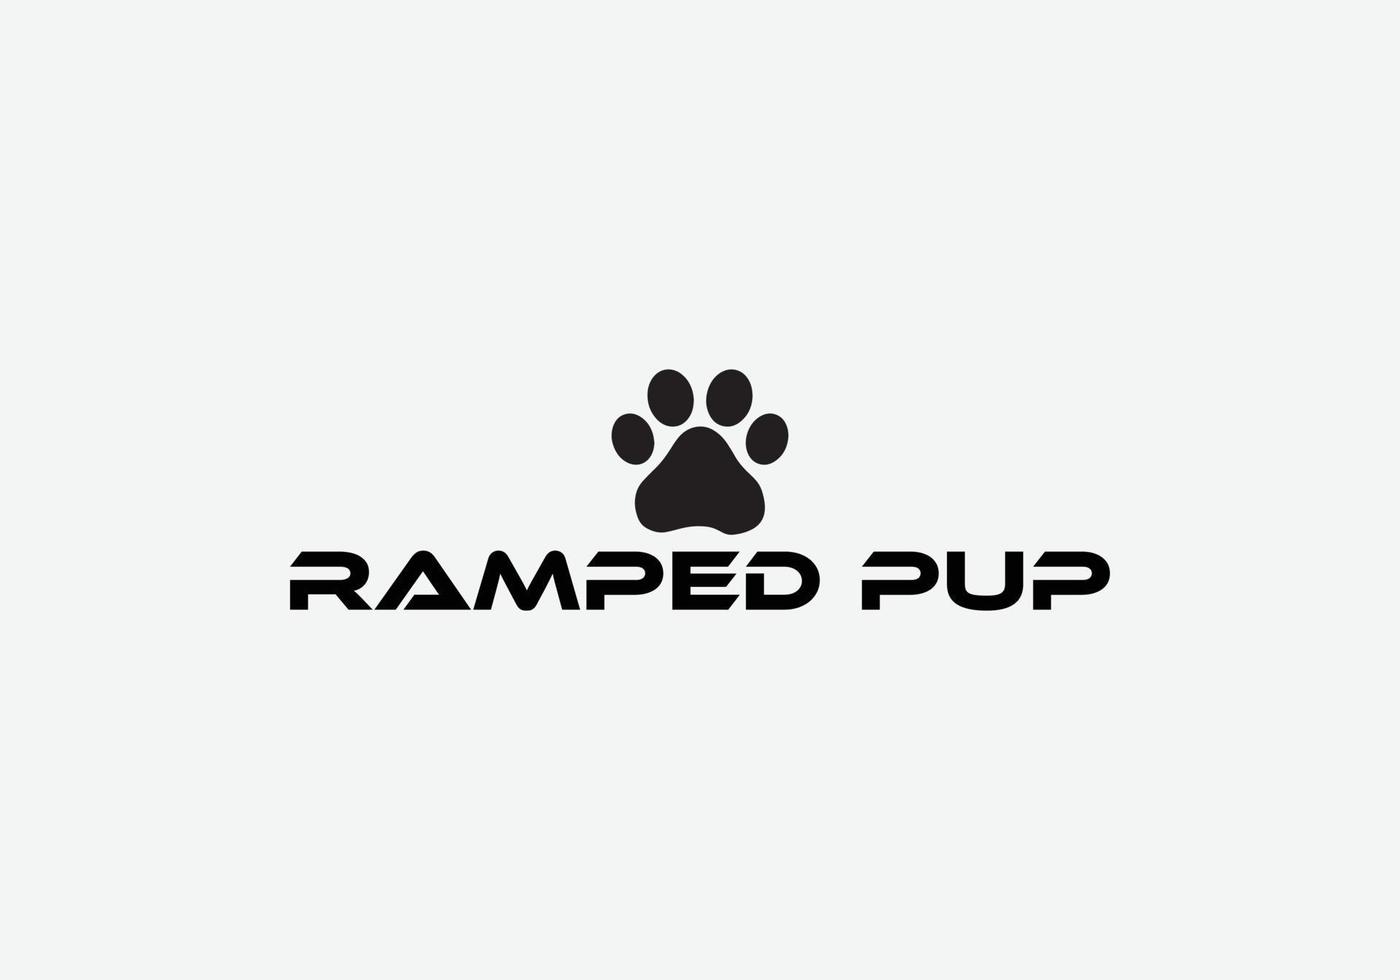 Ramped Pup dog paw vector icon logo design